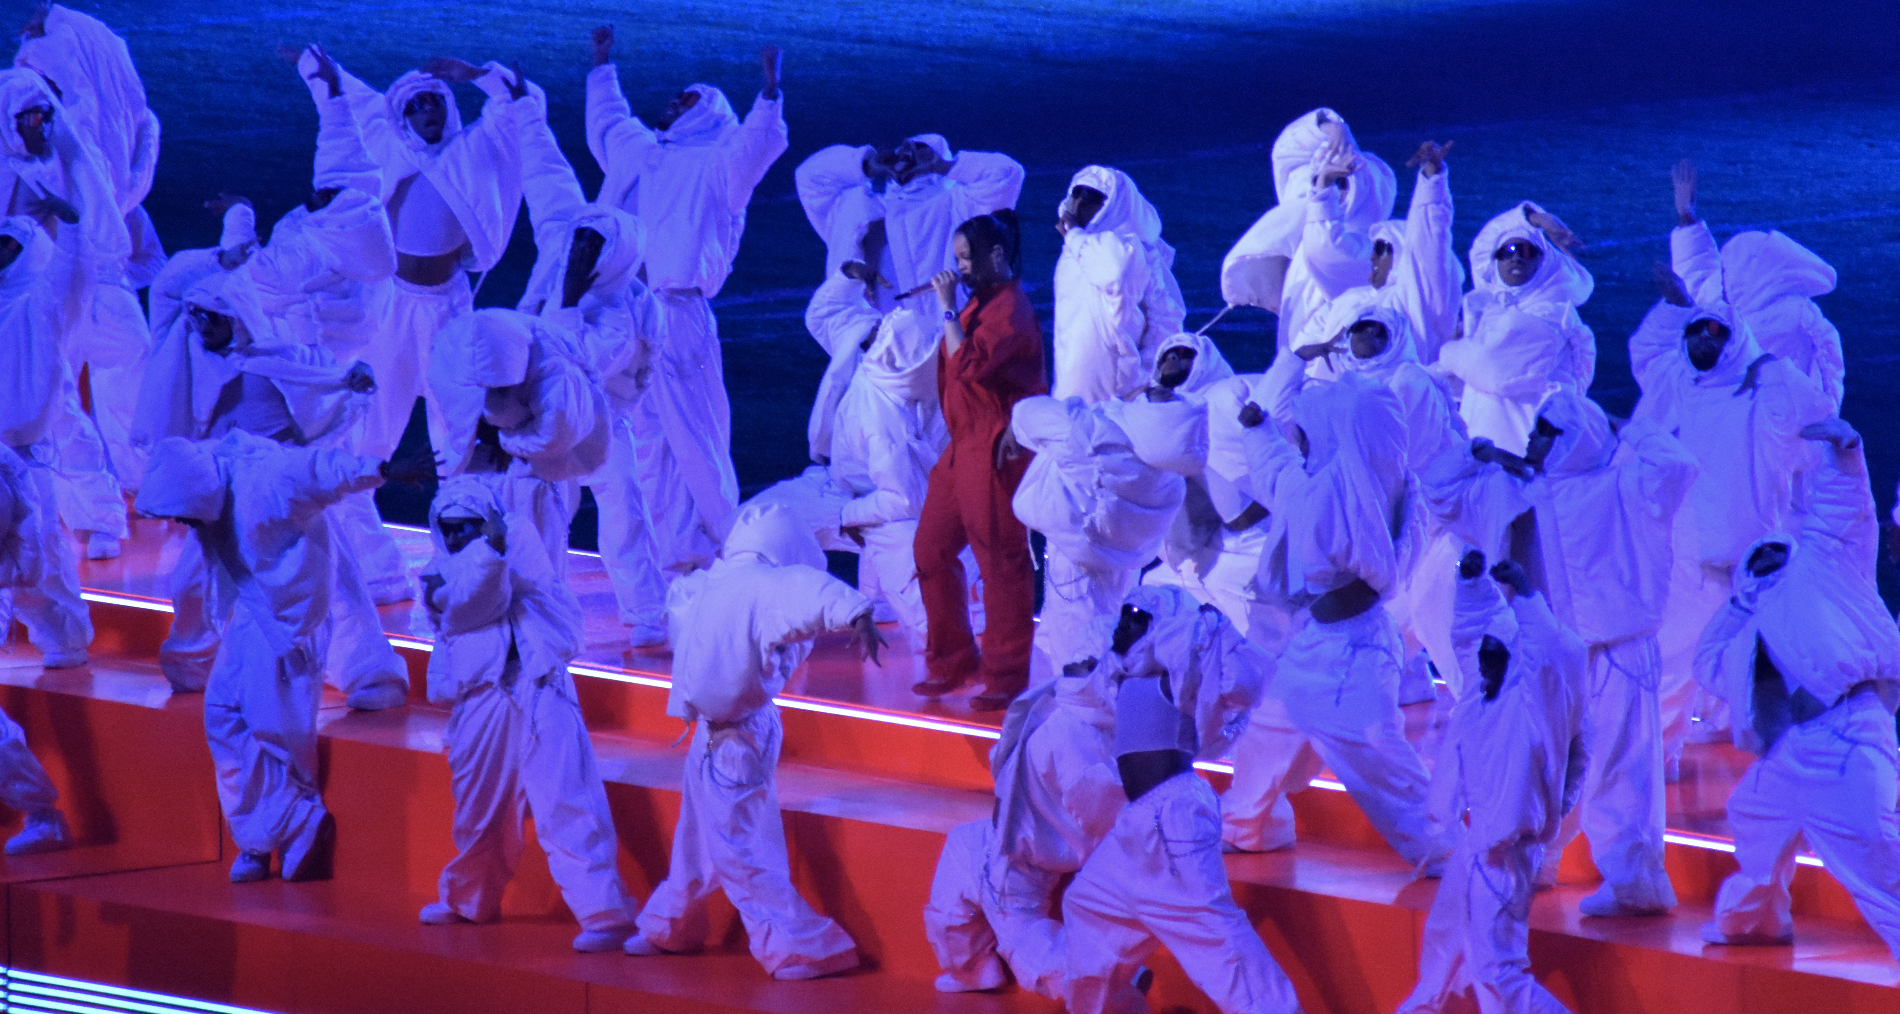 Rihanna and her dancers perform on a red stage